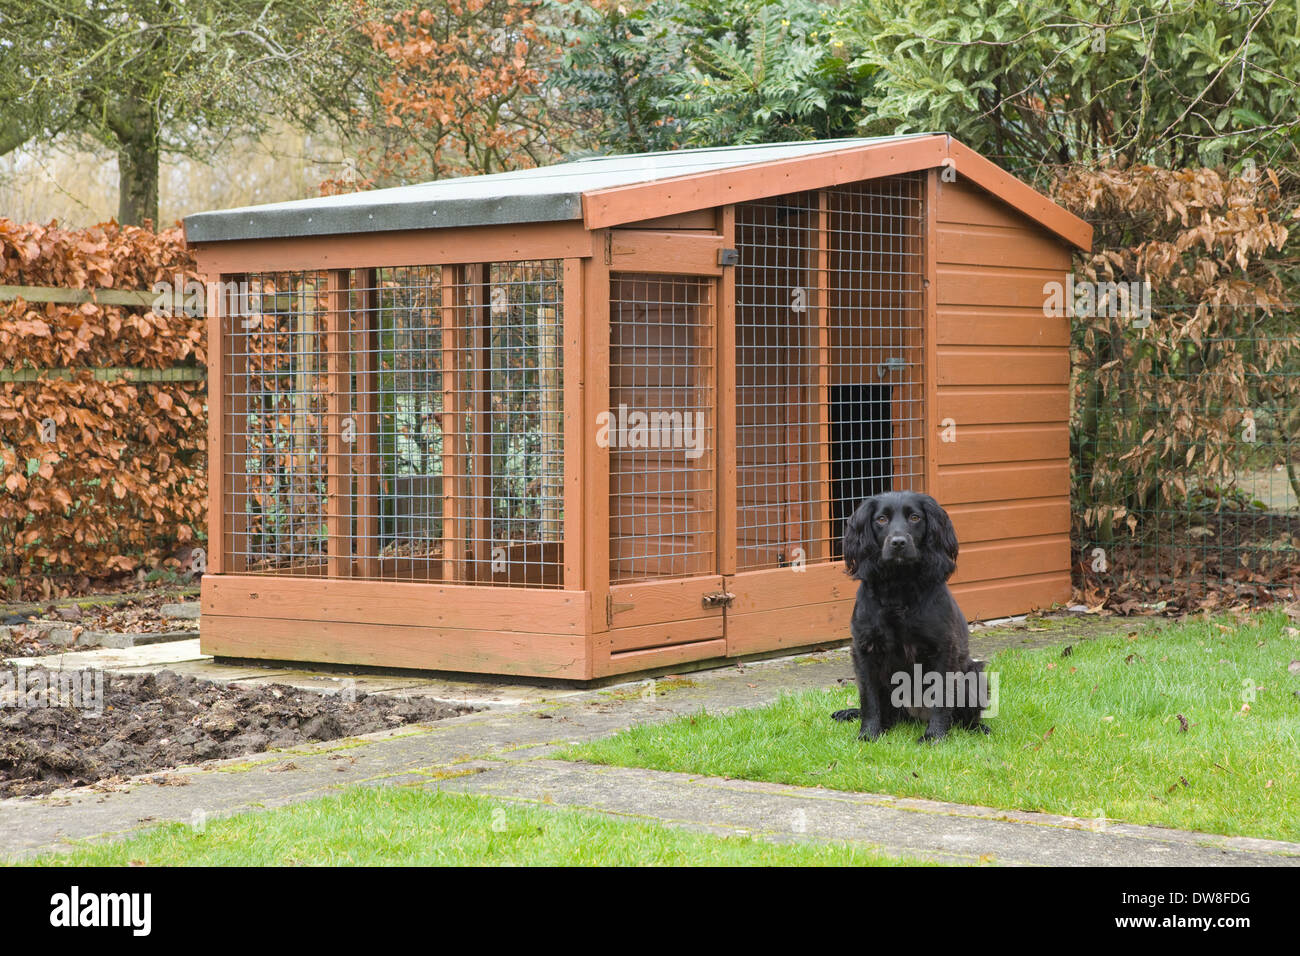 Dog In Kennel Photos & Dog In Kennel Images - Alamy